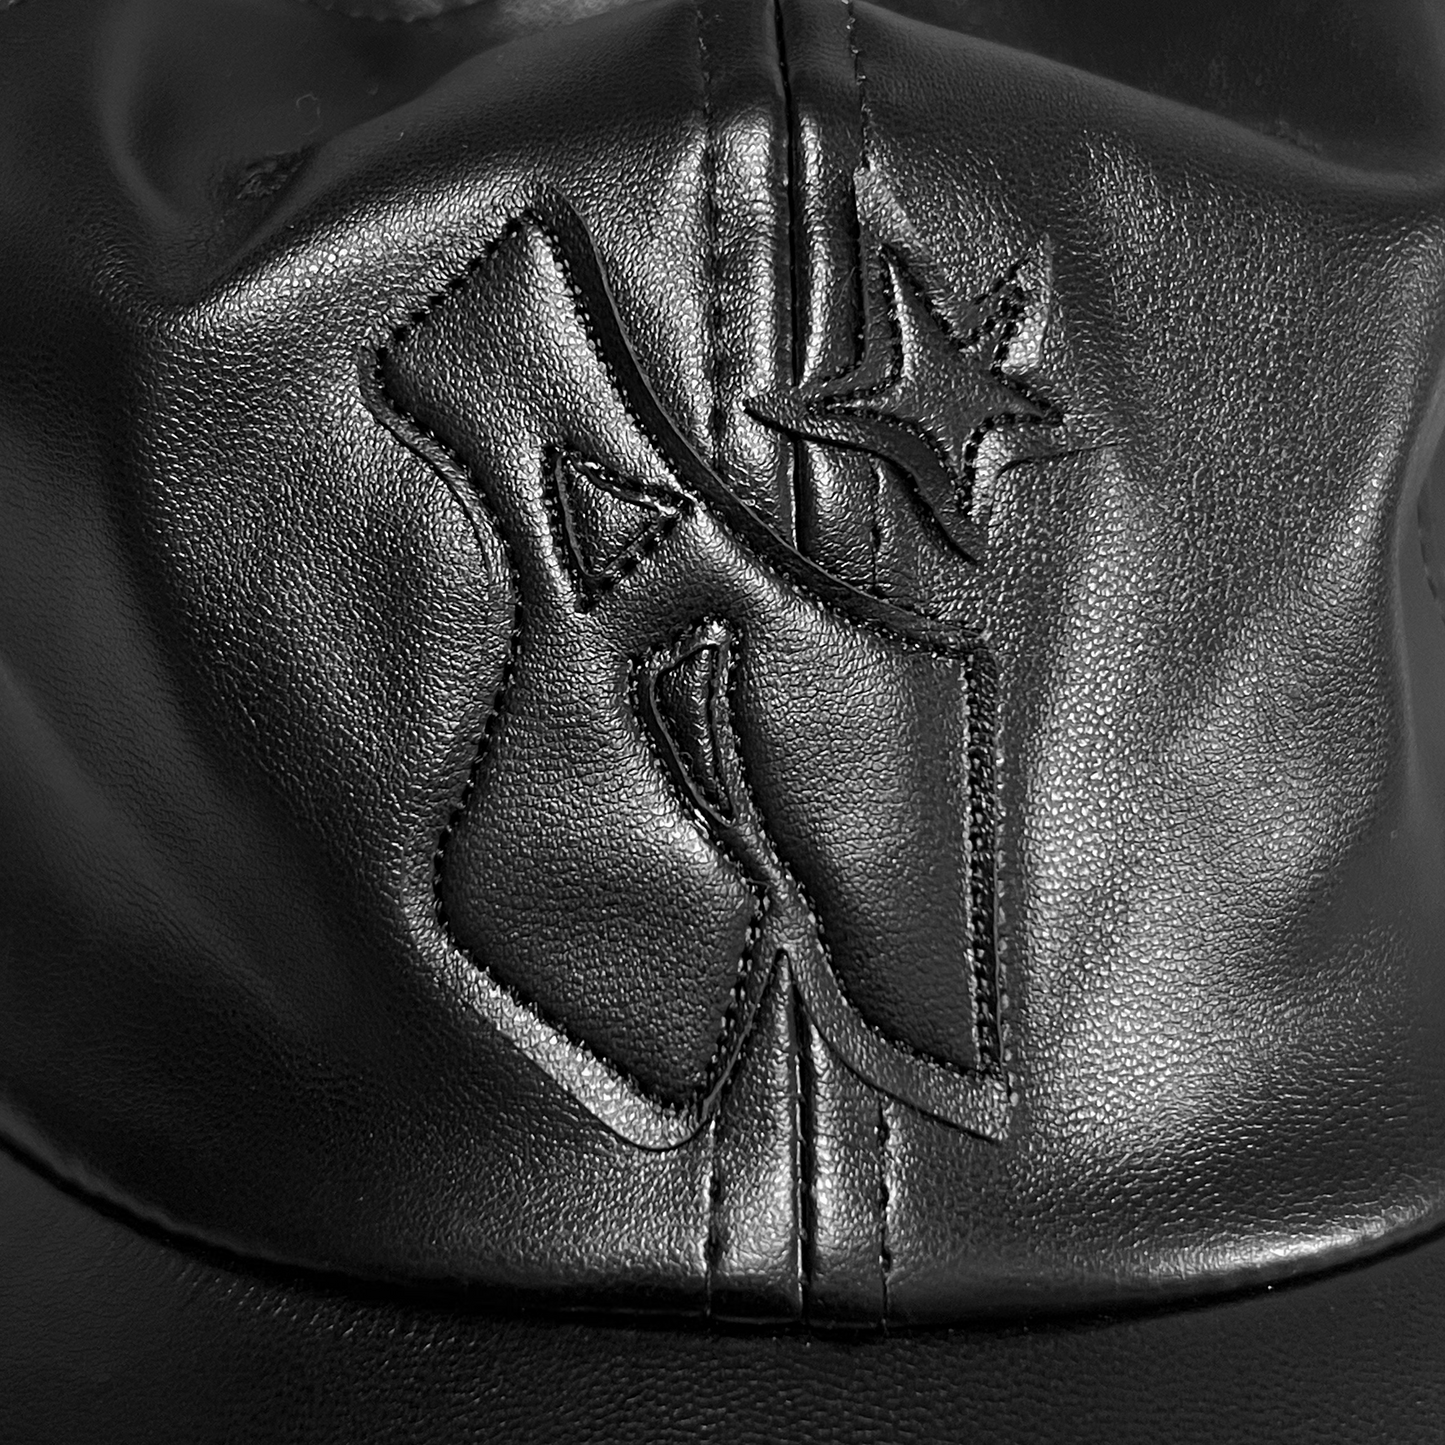 Leather A Hat